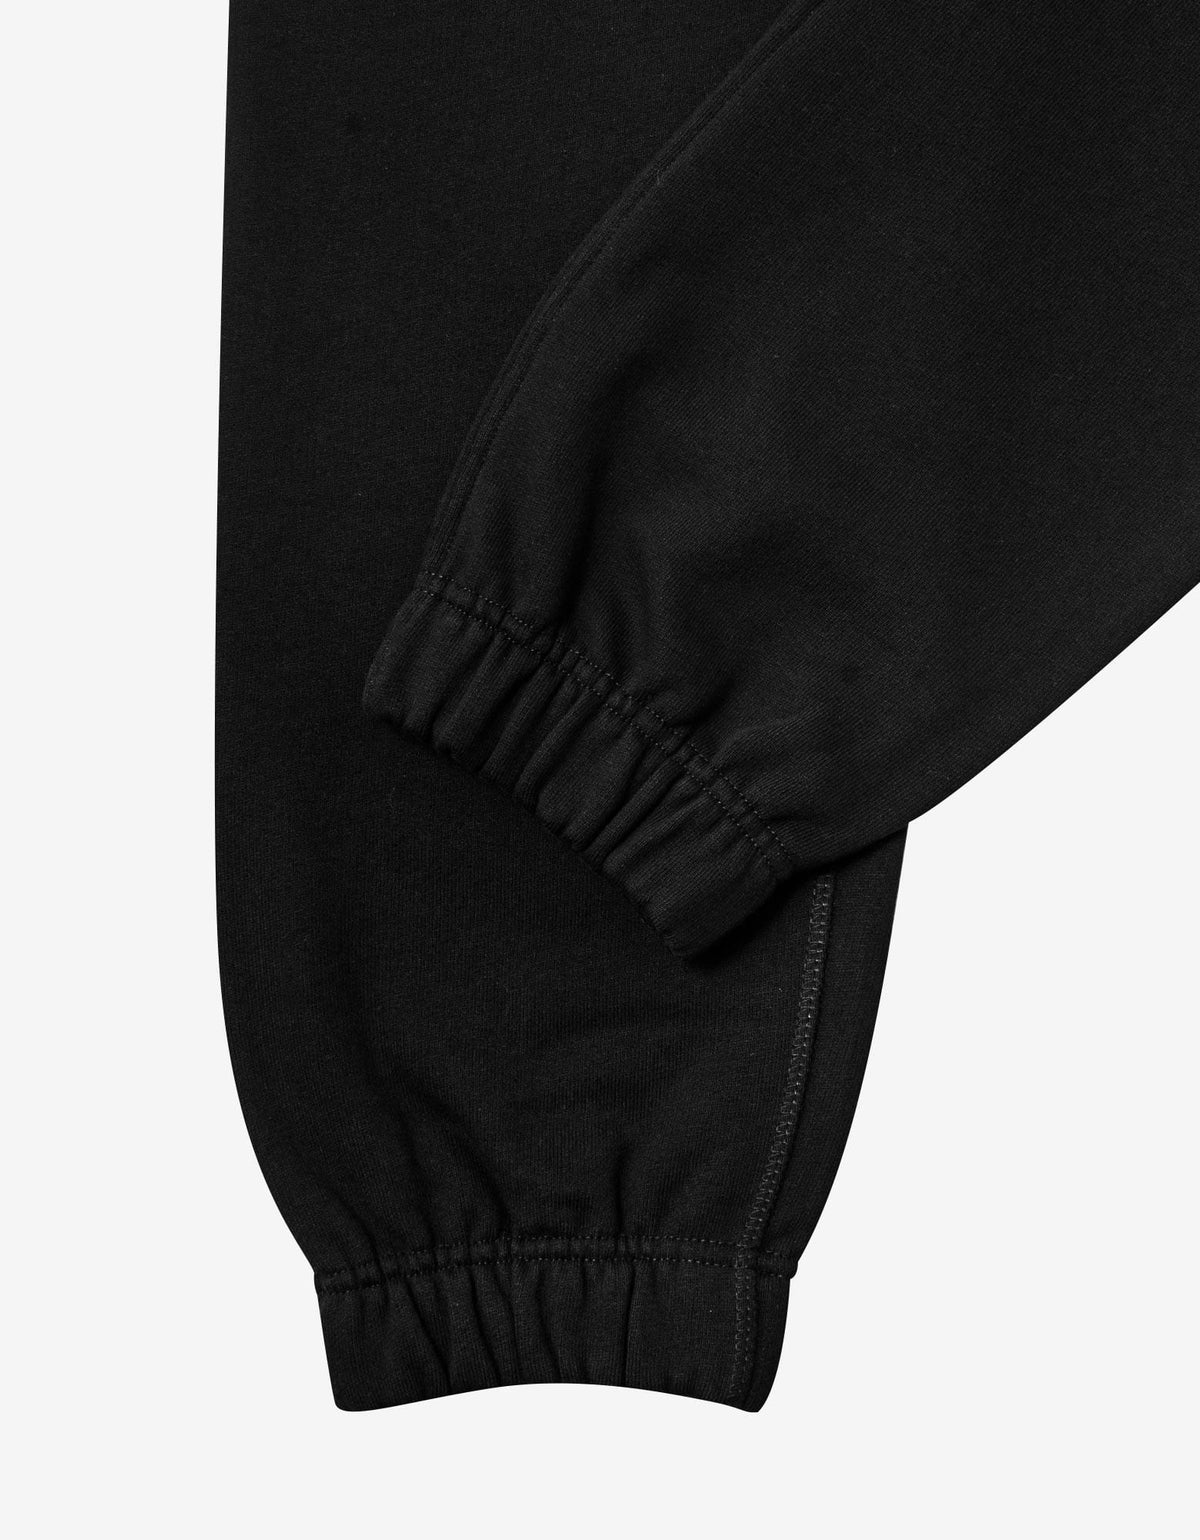 Givenchy Black Embroidered College Logo Sweat Pants